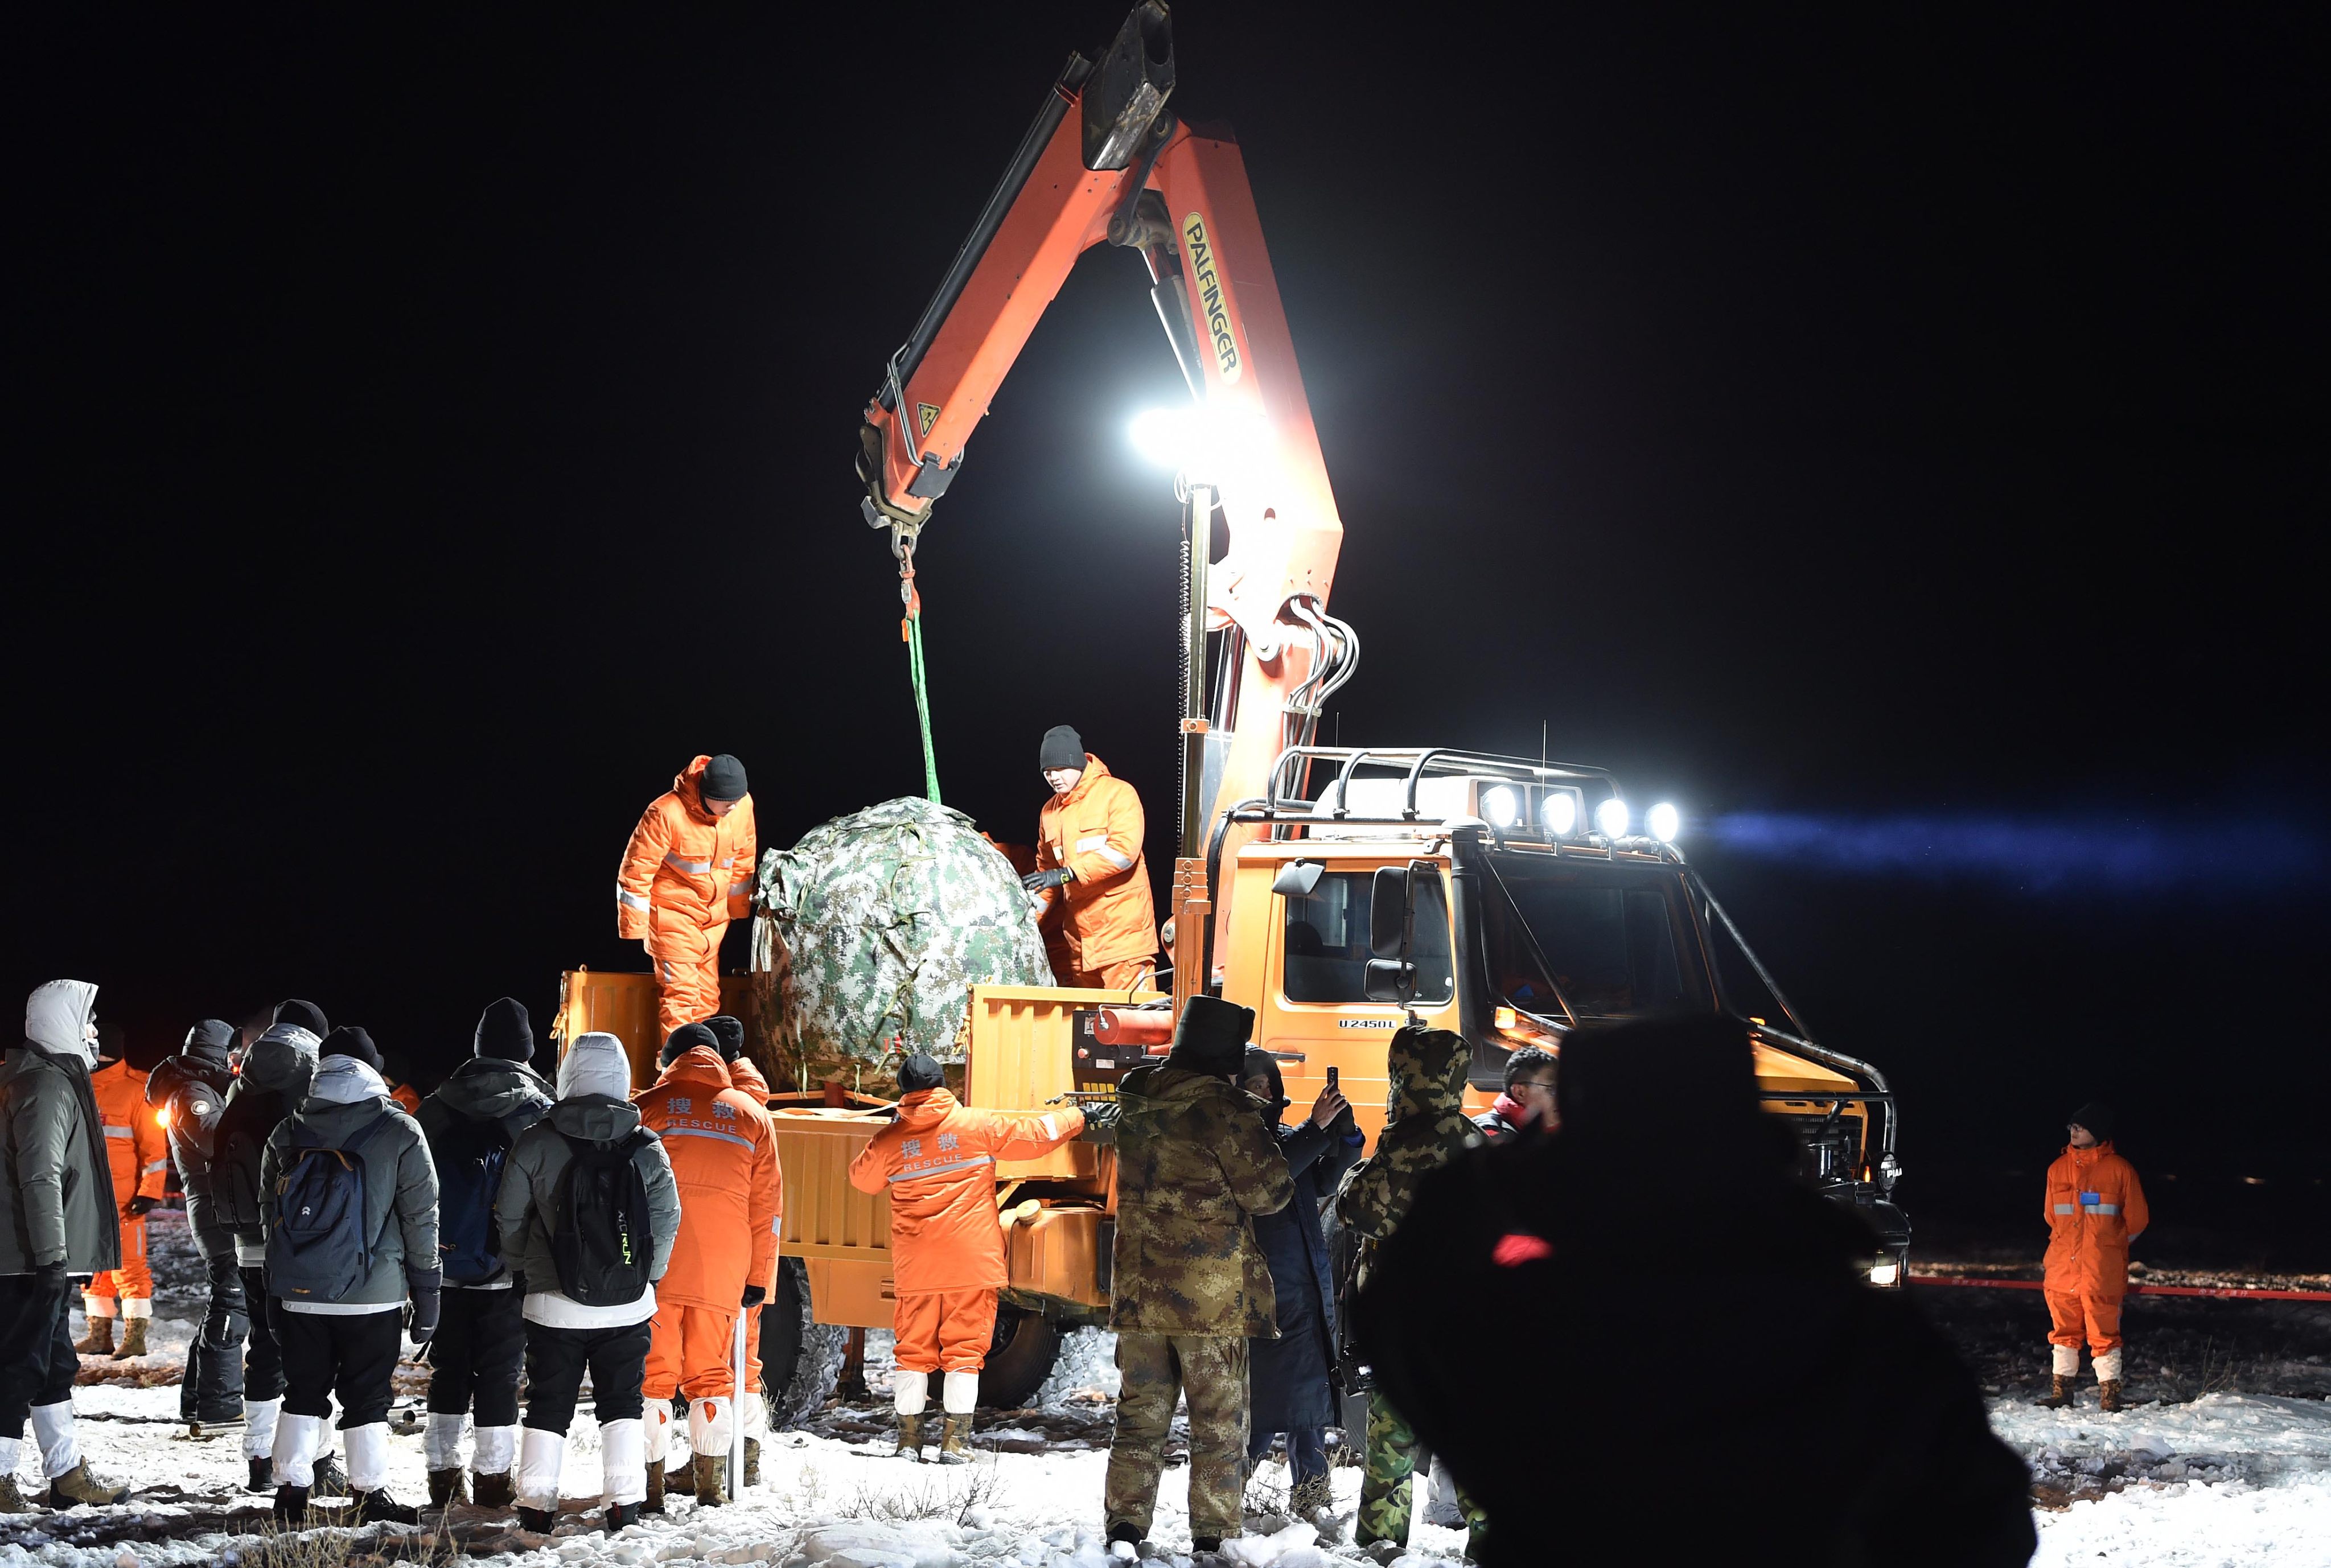 The Chinese rocket remnant that crashed into the moon was part of a 2014 test mission to prepare for the better-known Chang’e-5 mission, shown here, which brought lunar samples back to Earth in 2020. Photo: Xinhua